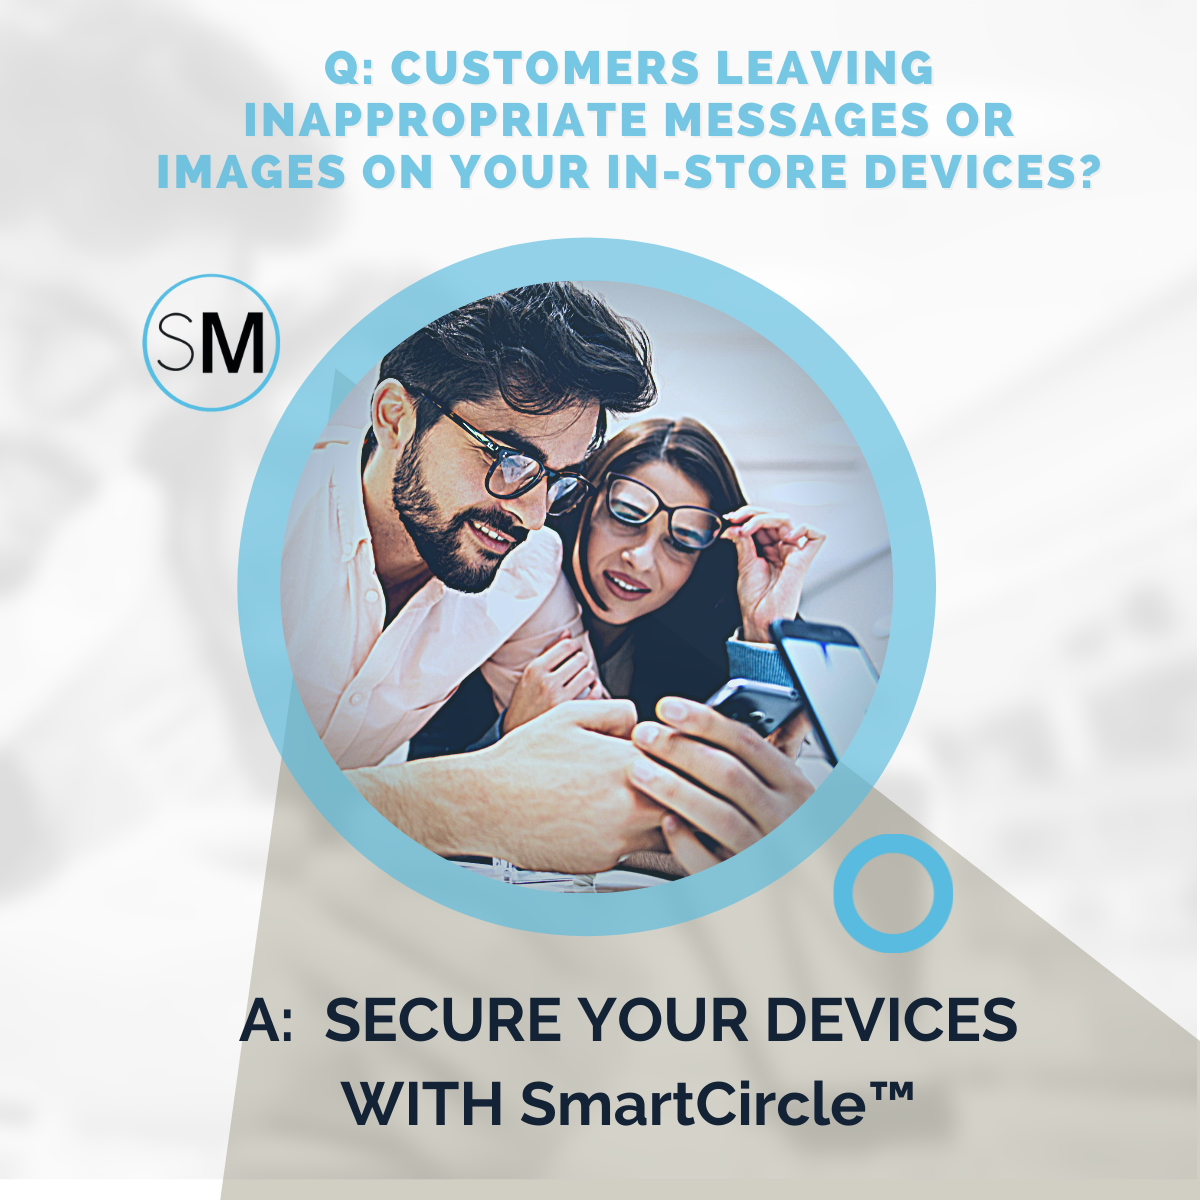 text asking customers leaving inappropriate messages or images on your in-store devices above an image of two customers distraught by what they see on wireless store devices and below an answer secure your devices with SmartCircle